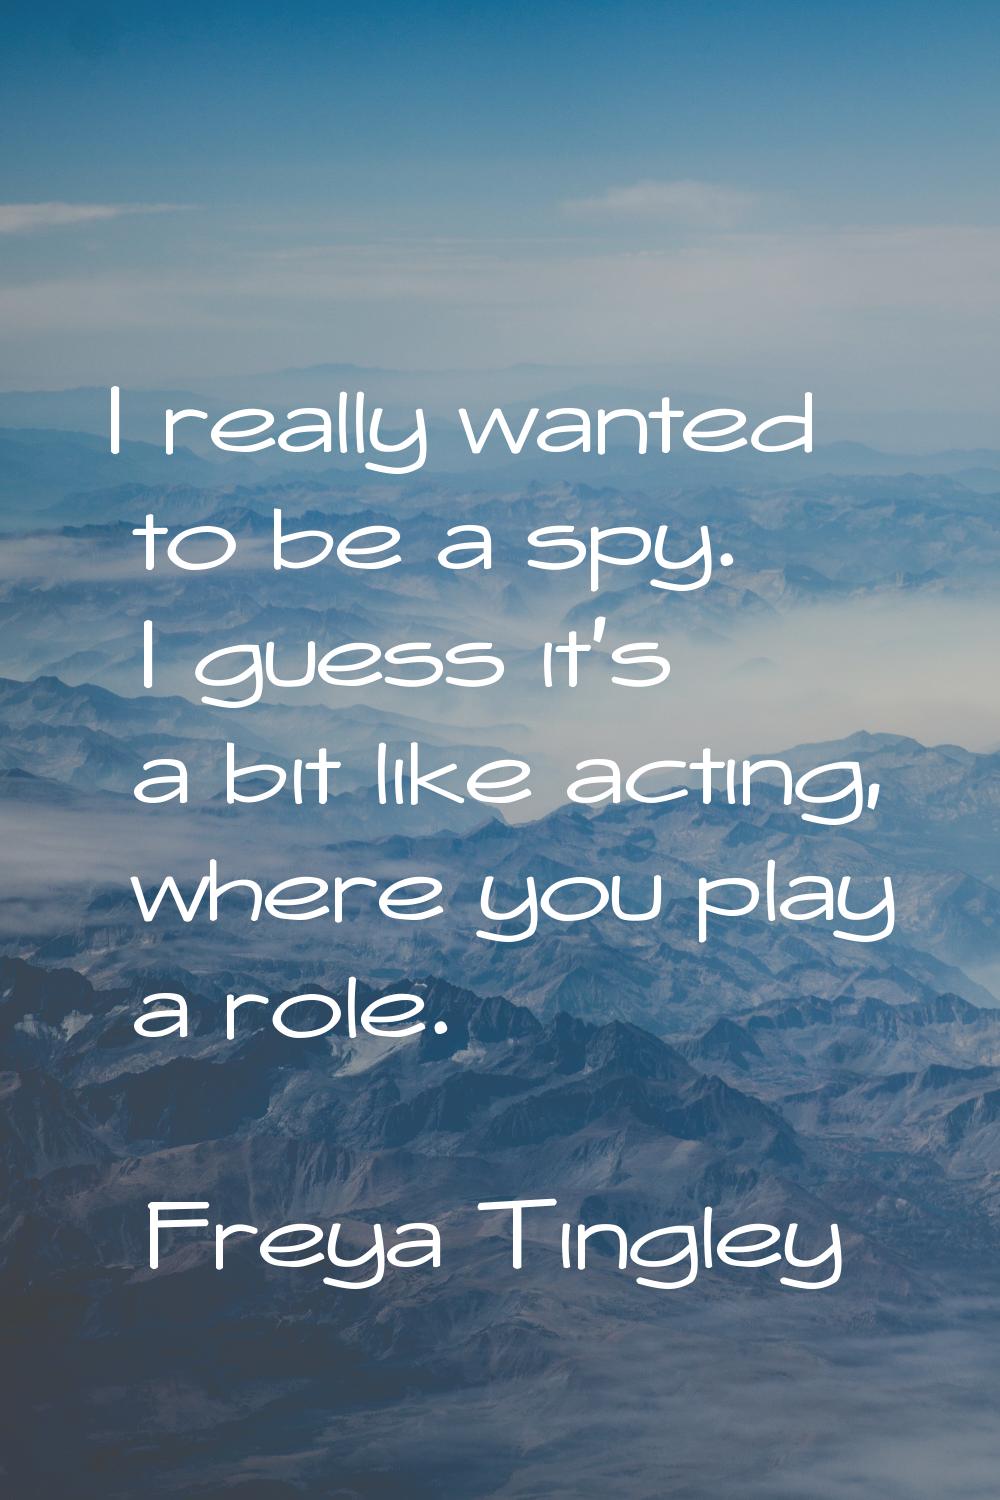 I really wanted to be a spy. I guess it's a bit like acting, where you play a role.